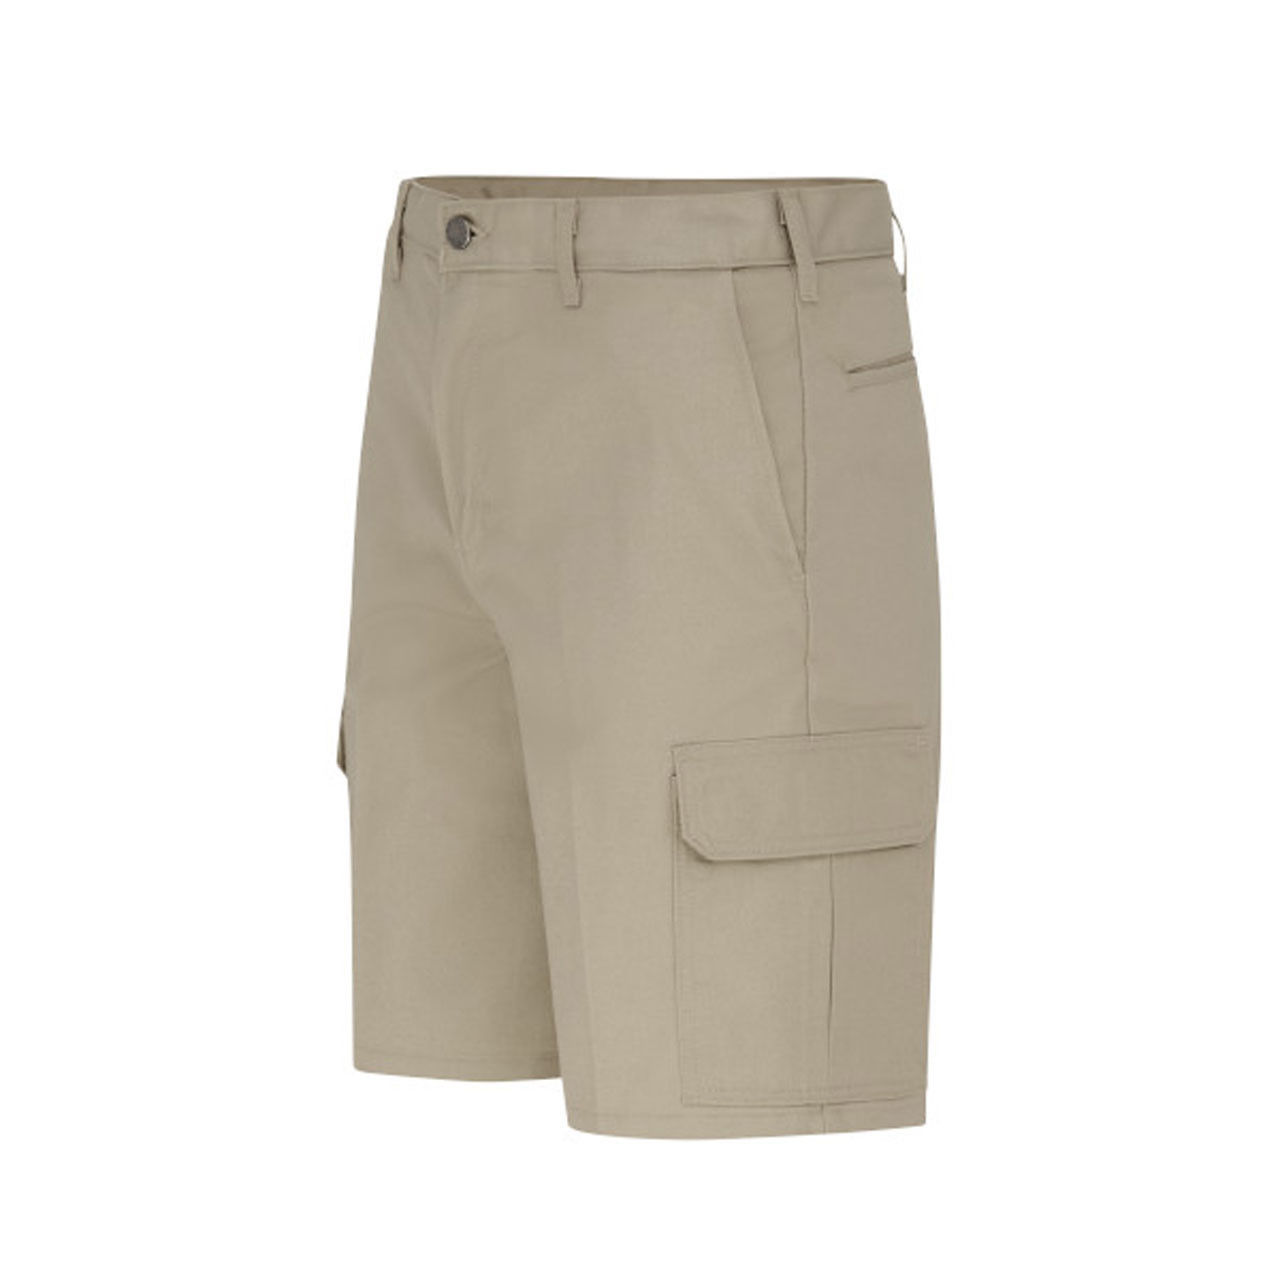 Dickies Industrial Cargo Short - LR00 Questions & Answers